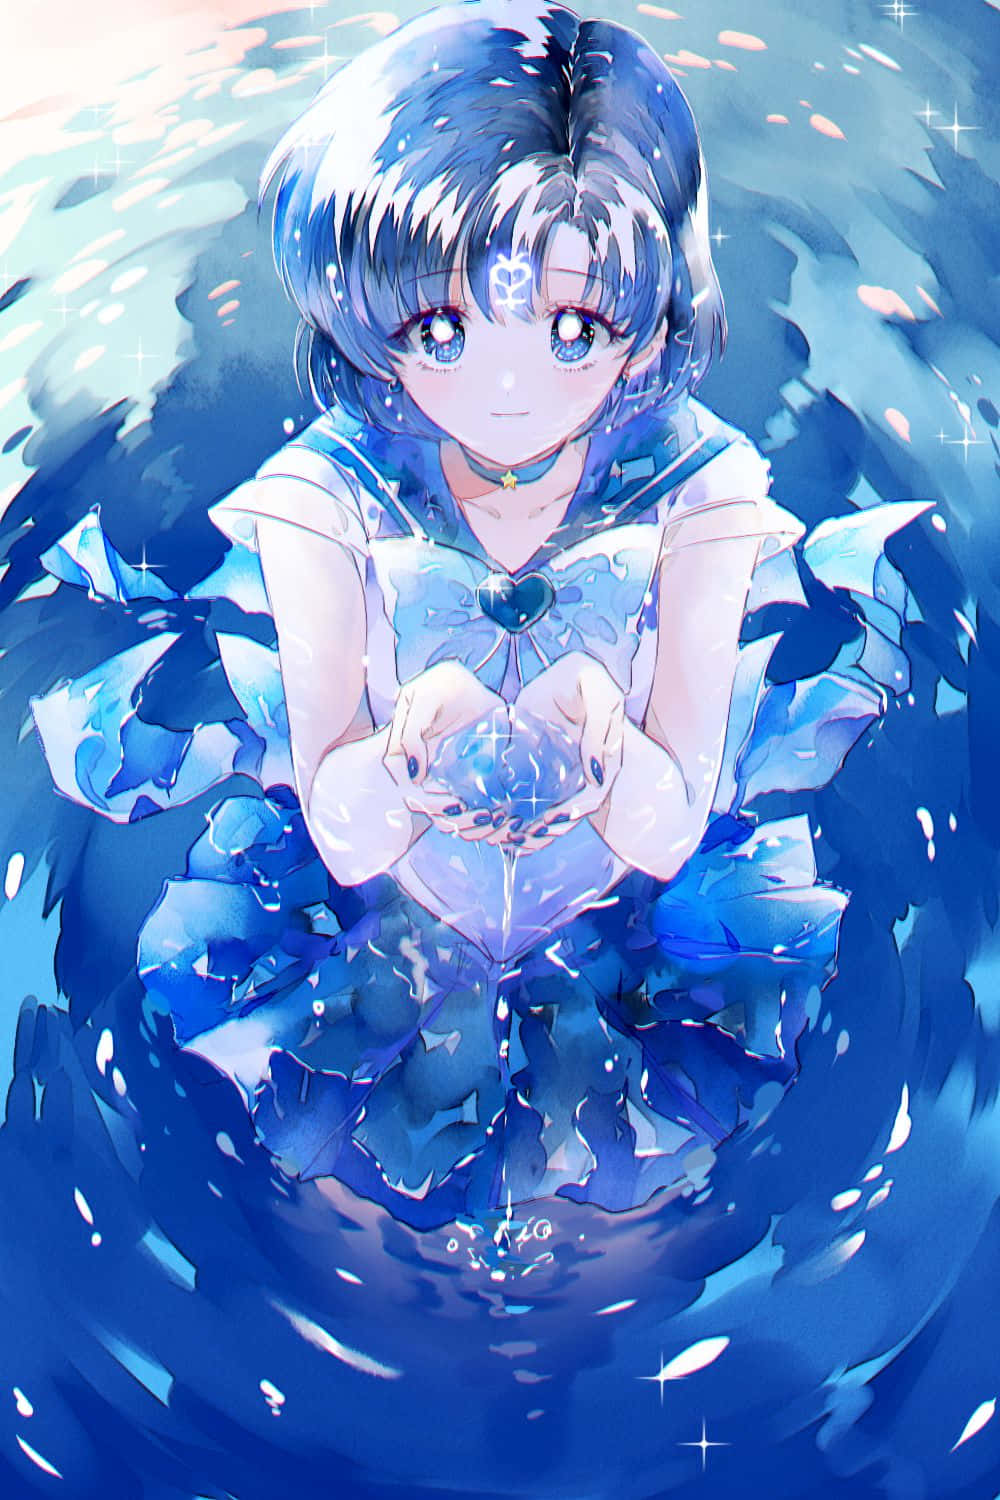 “The mystical strength of Sailor Mercury will protect us all.” Wallpaper